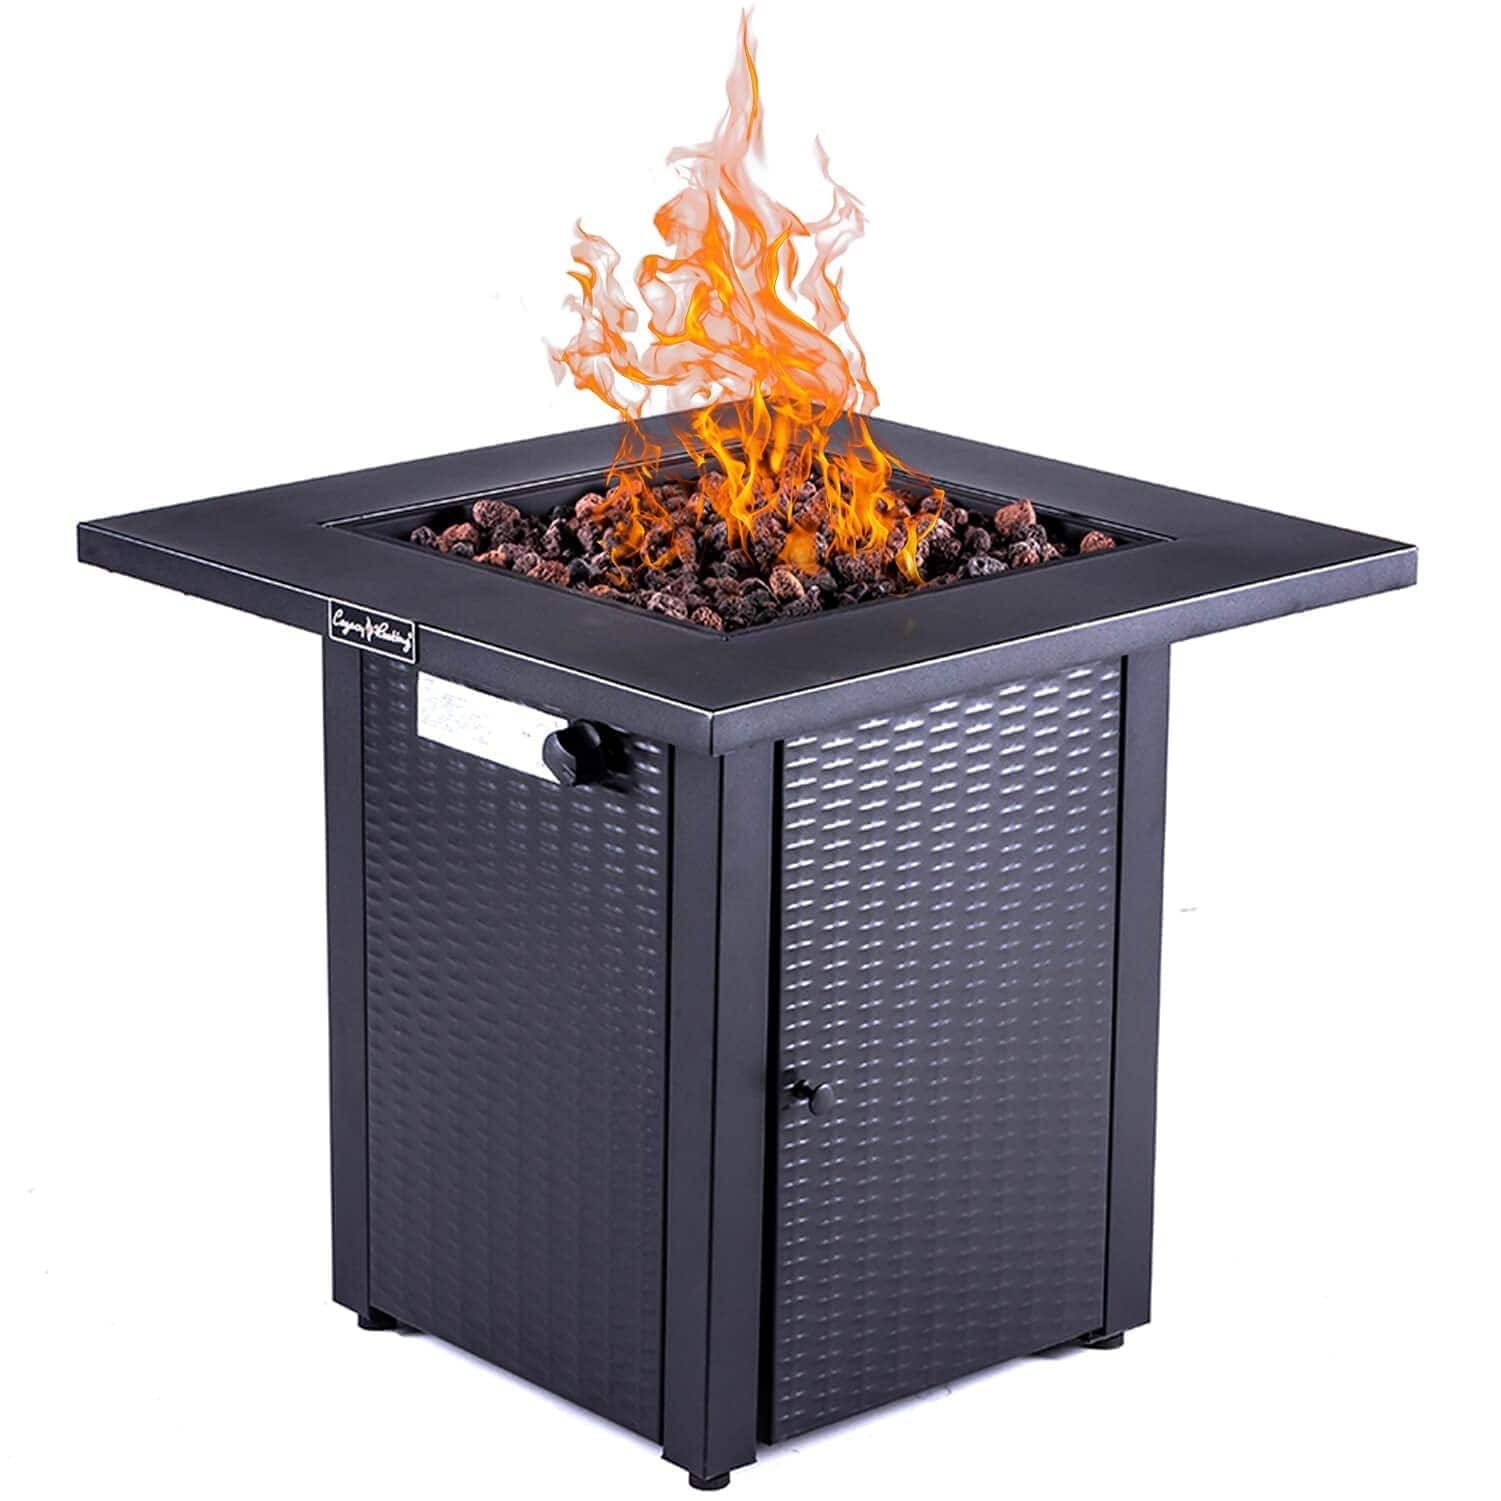 TiramisuBest Outdoor Propane Fire Pit Table with Lid, 50,000BTU